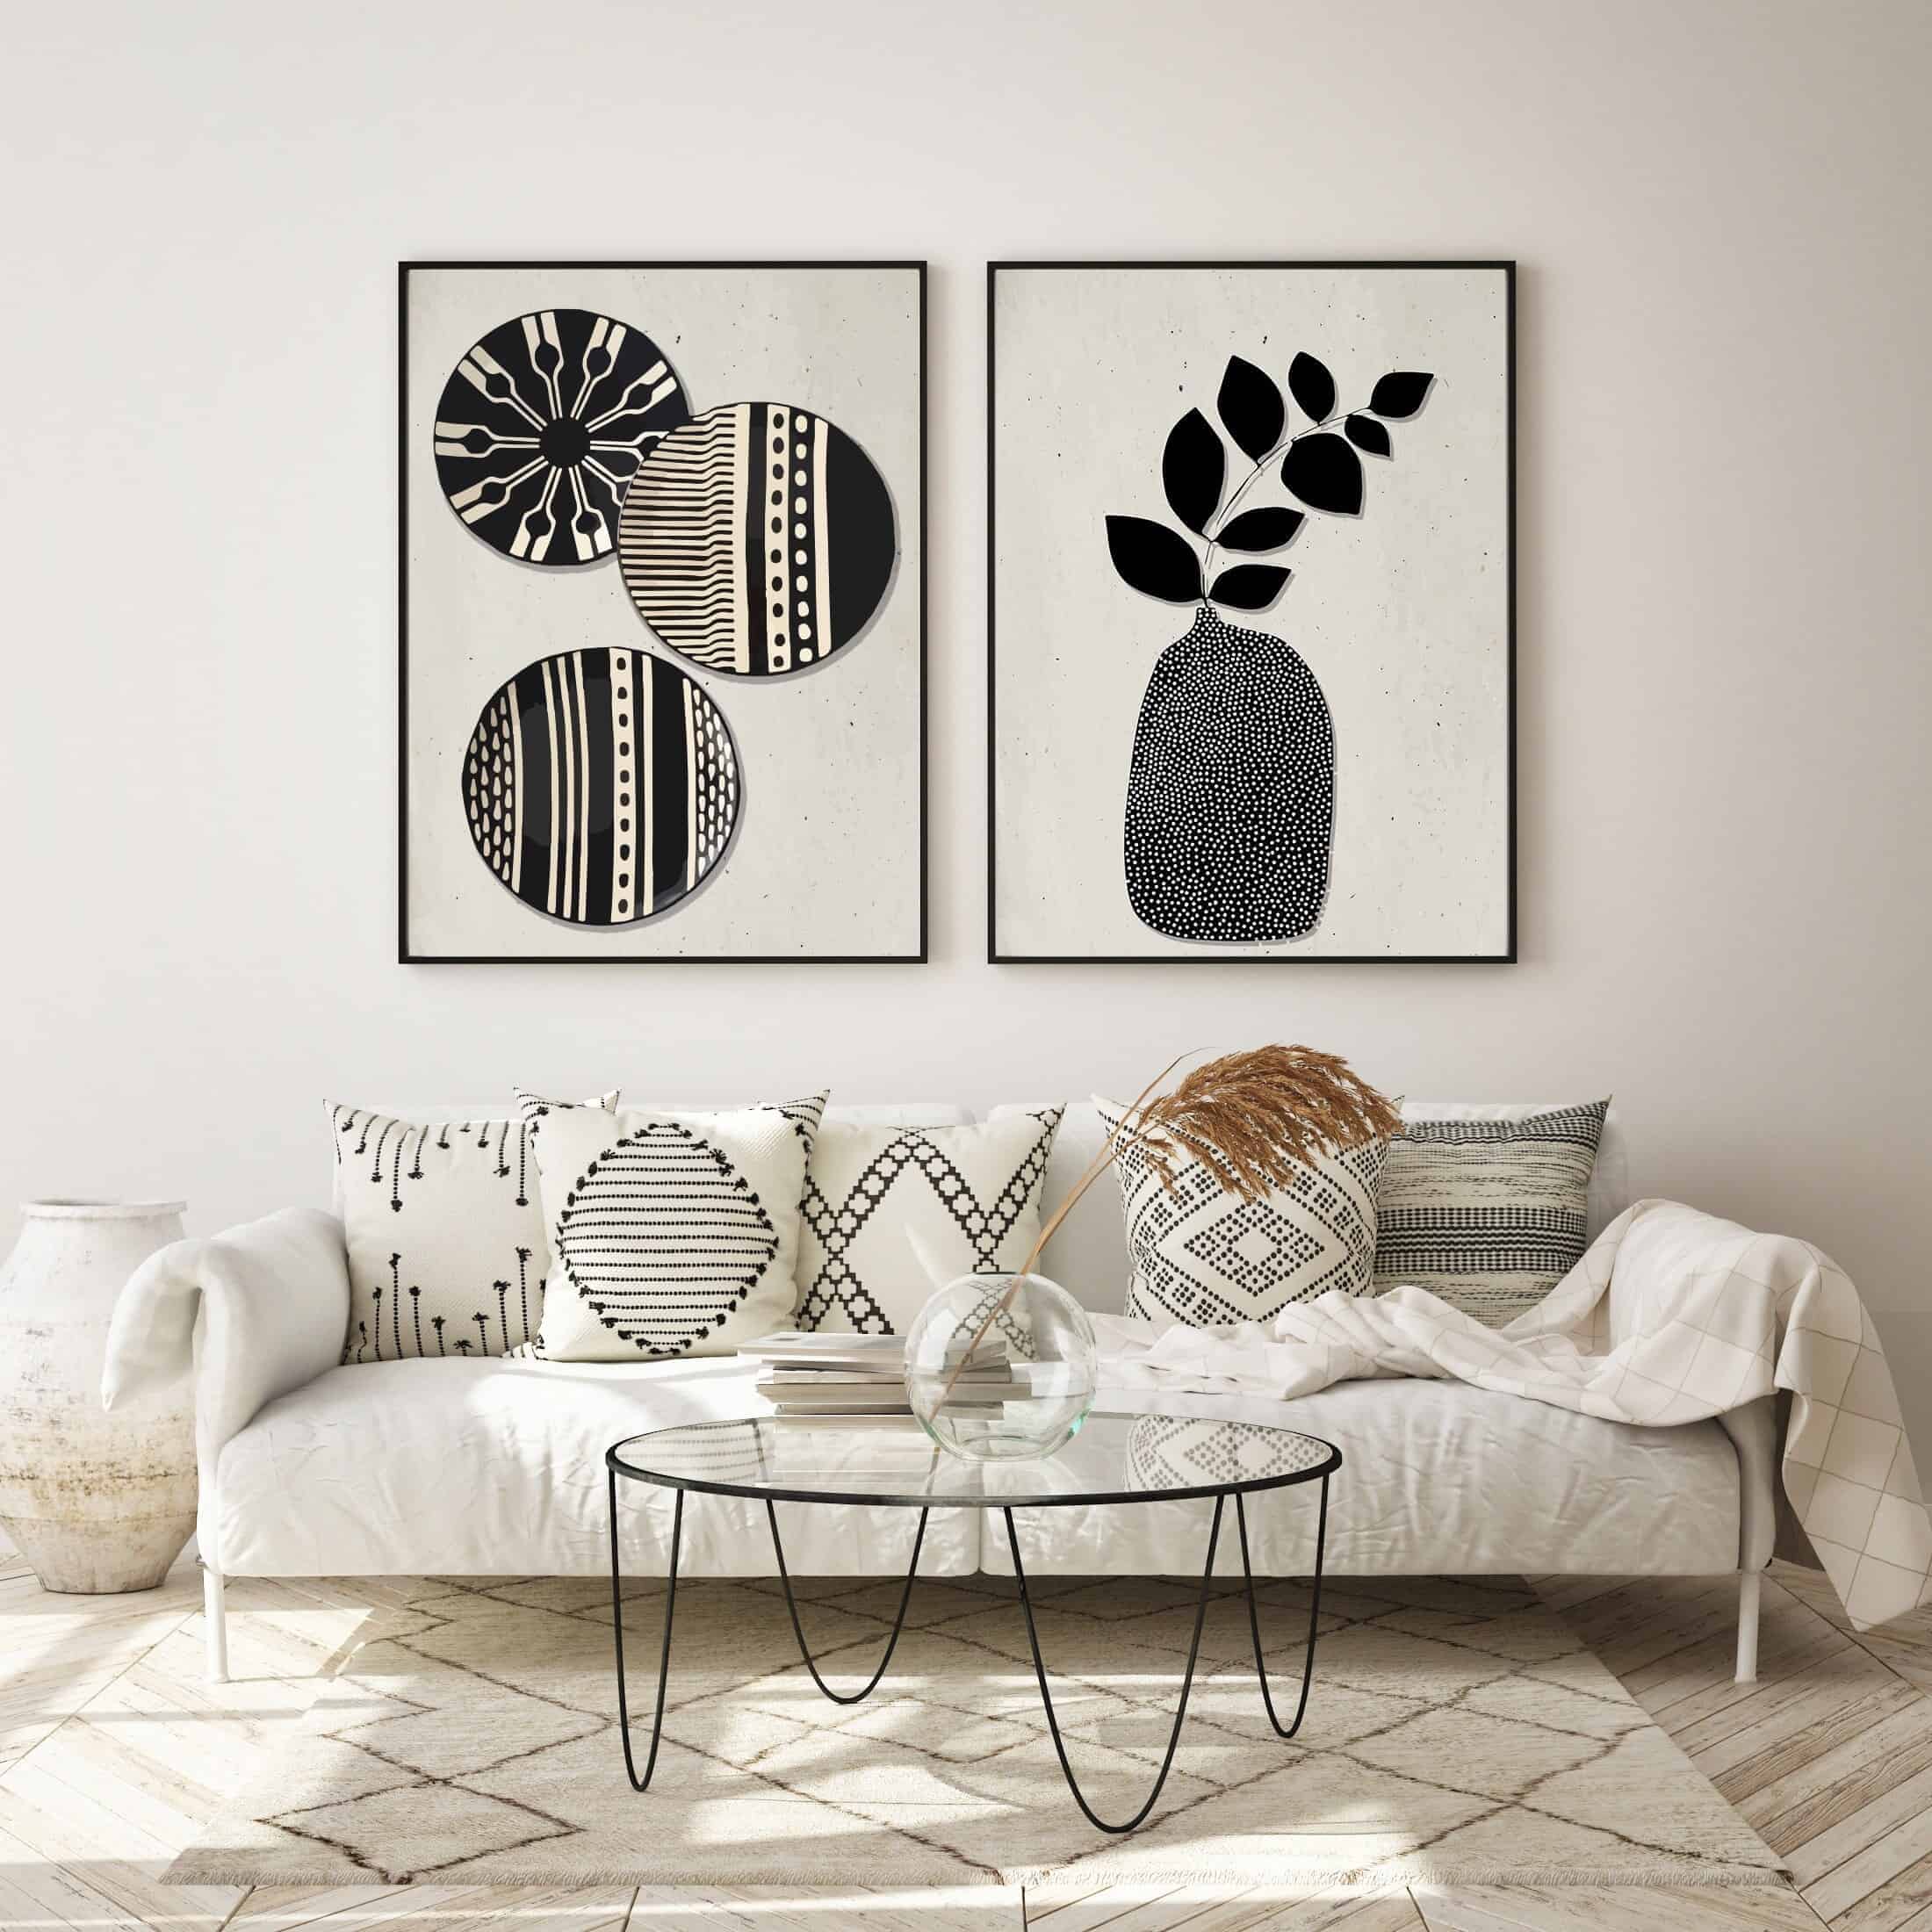 Kiddale Love and Hand in Hand Wall Art Canvas Print PosterSimple Fashion  Black and White Sketch Art Line Drawing Decor for Home Living Room Bedroom  OfficeSet of 3 Unframed 12x16  